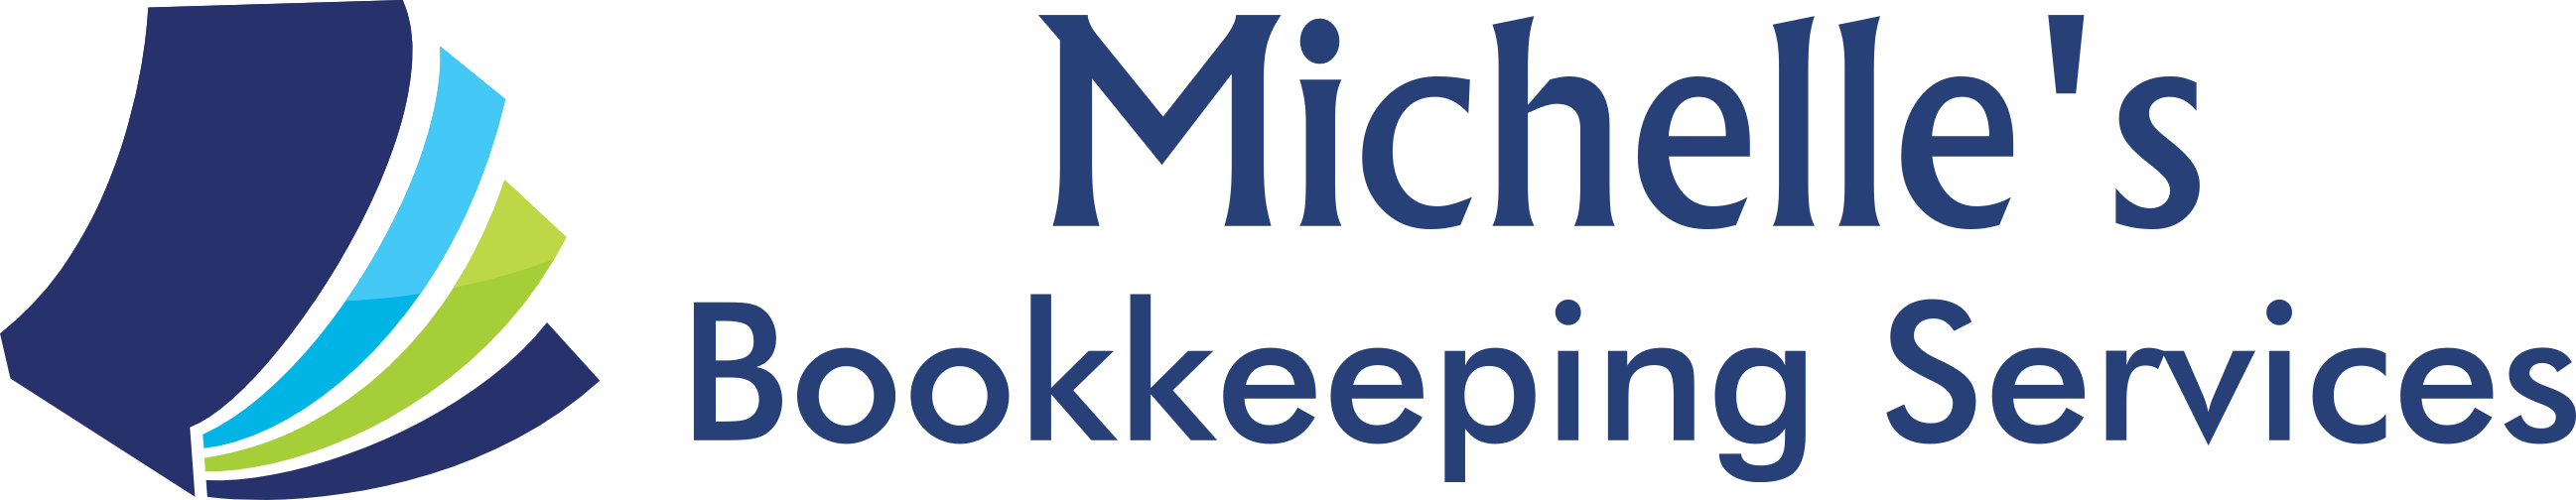 michellesbookkeepingservices